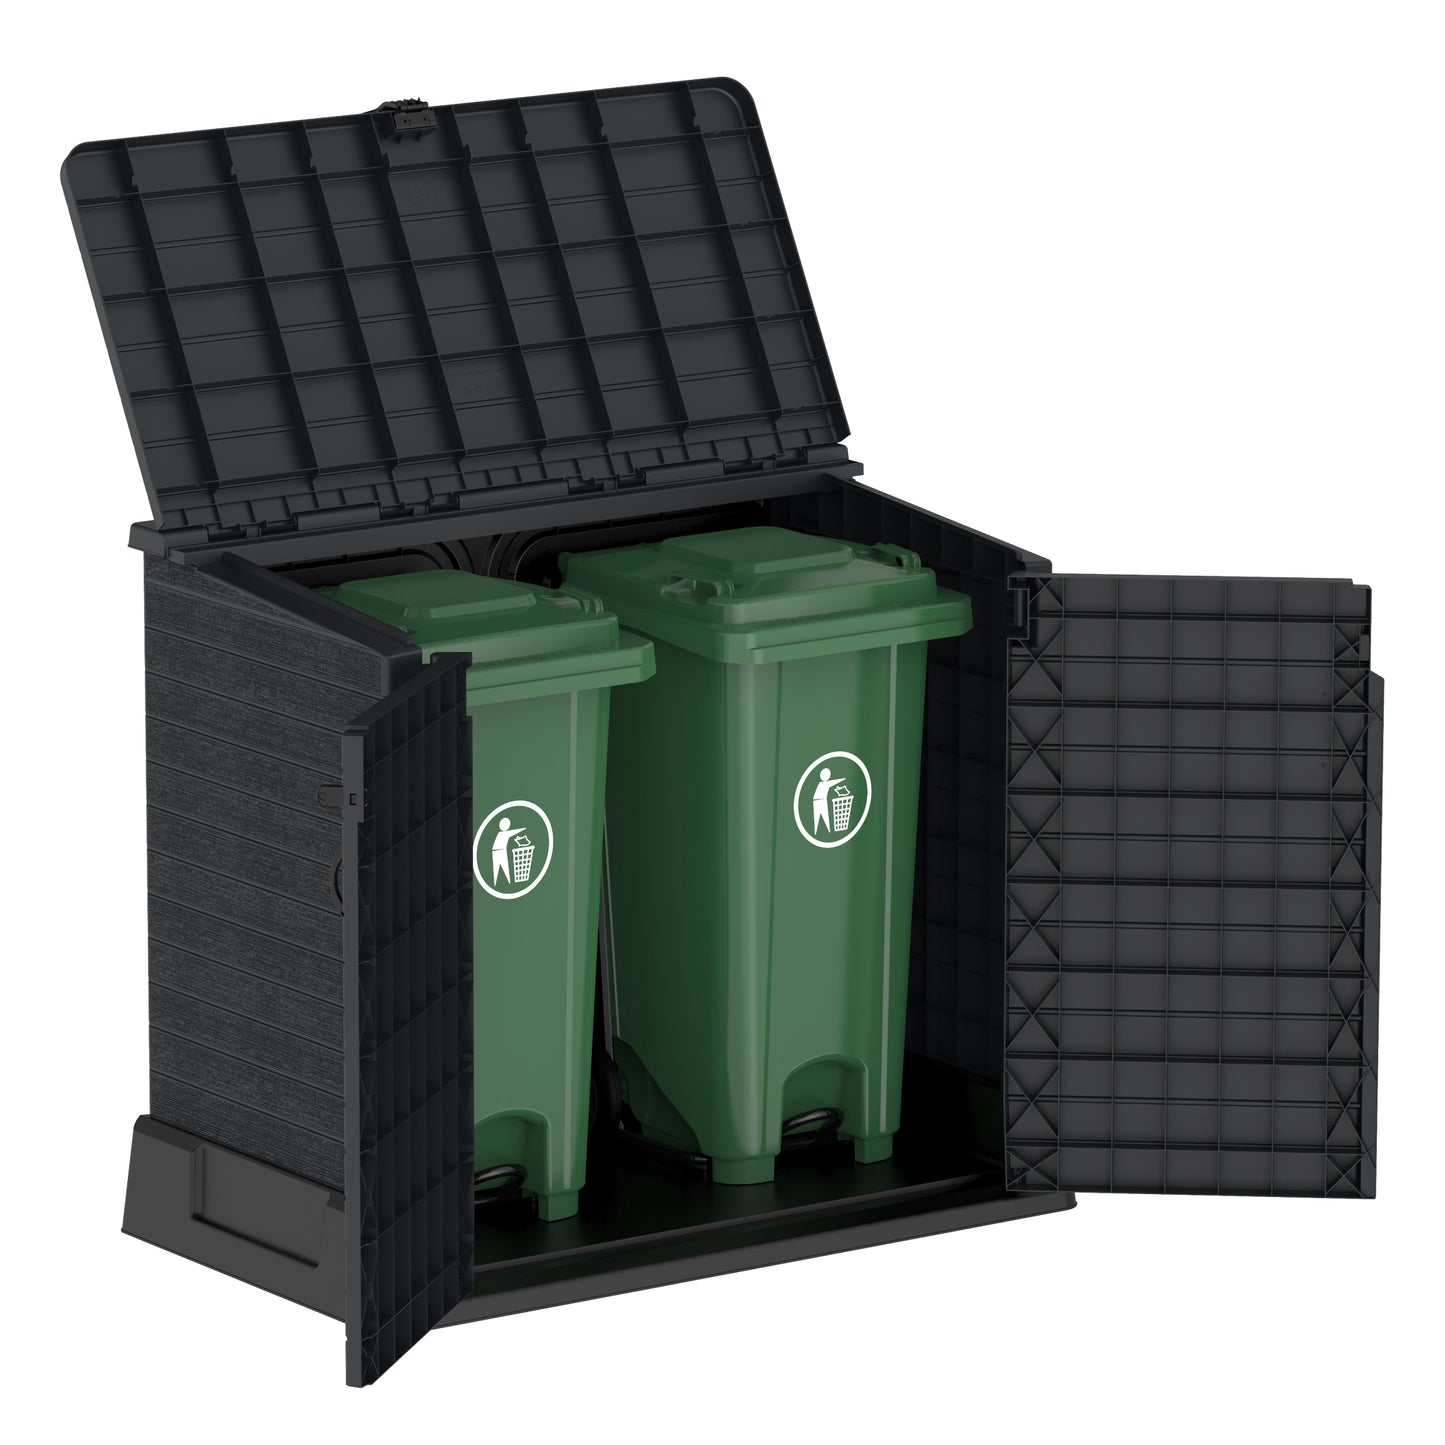 Dark grey plastic garbage storage shed for outdoor use, ideal for two garbage bins with top entry for easy access.